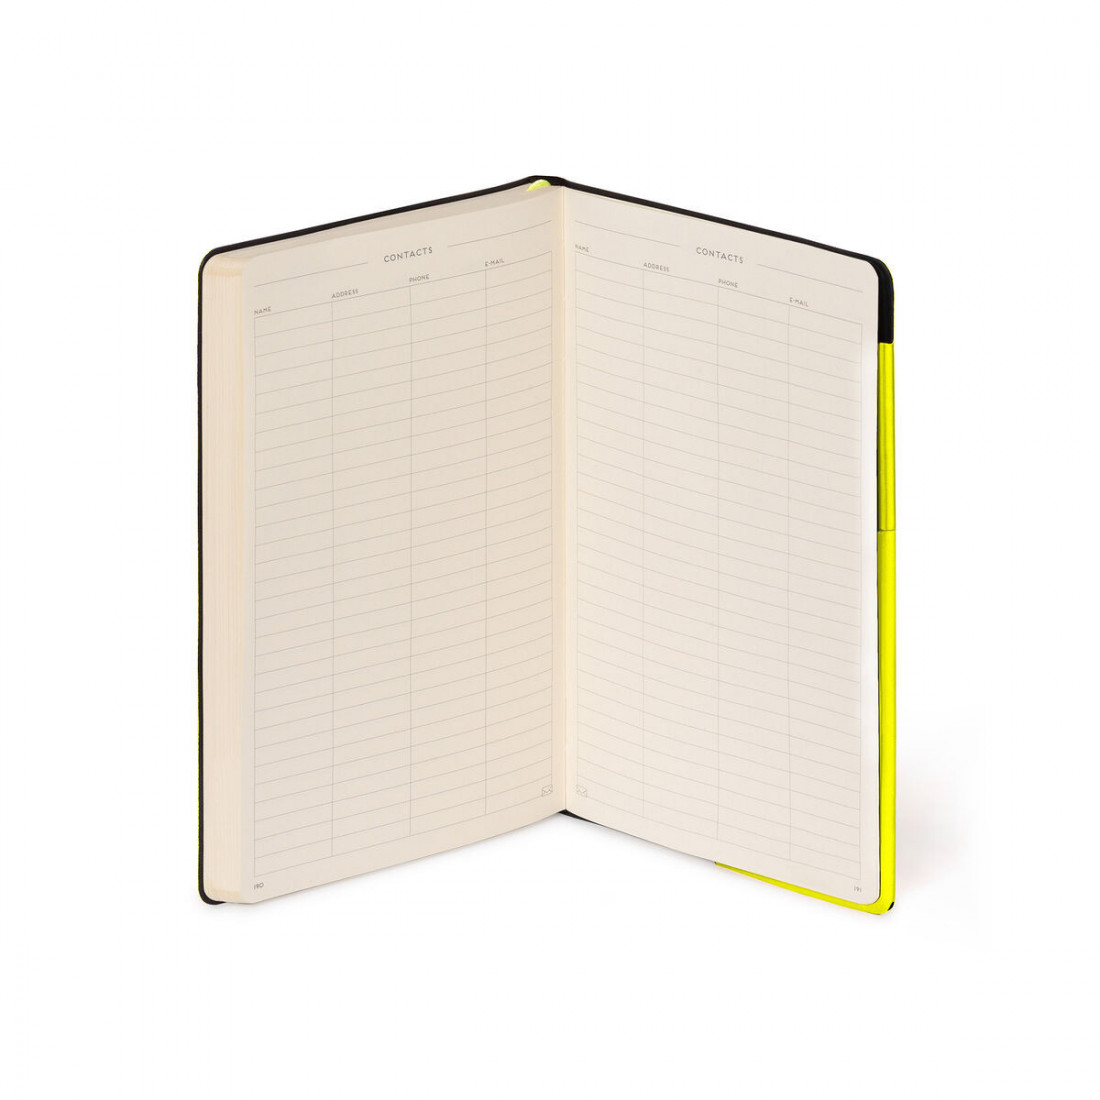 My Notebook - Lined - Medium - Neon Yellow Cover LEGAMI